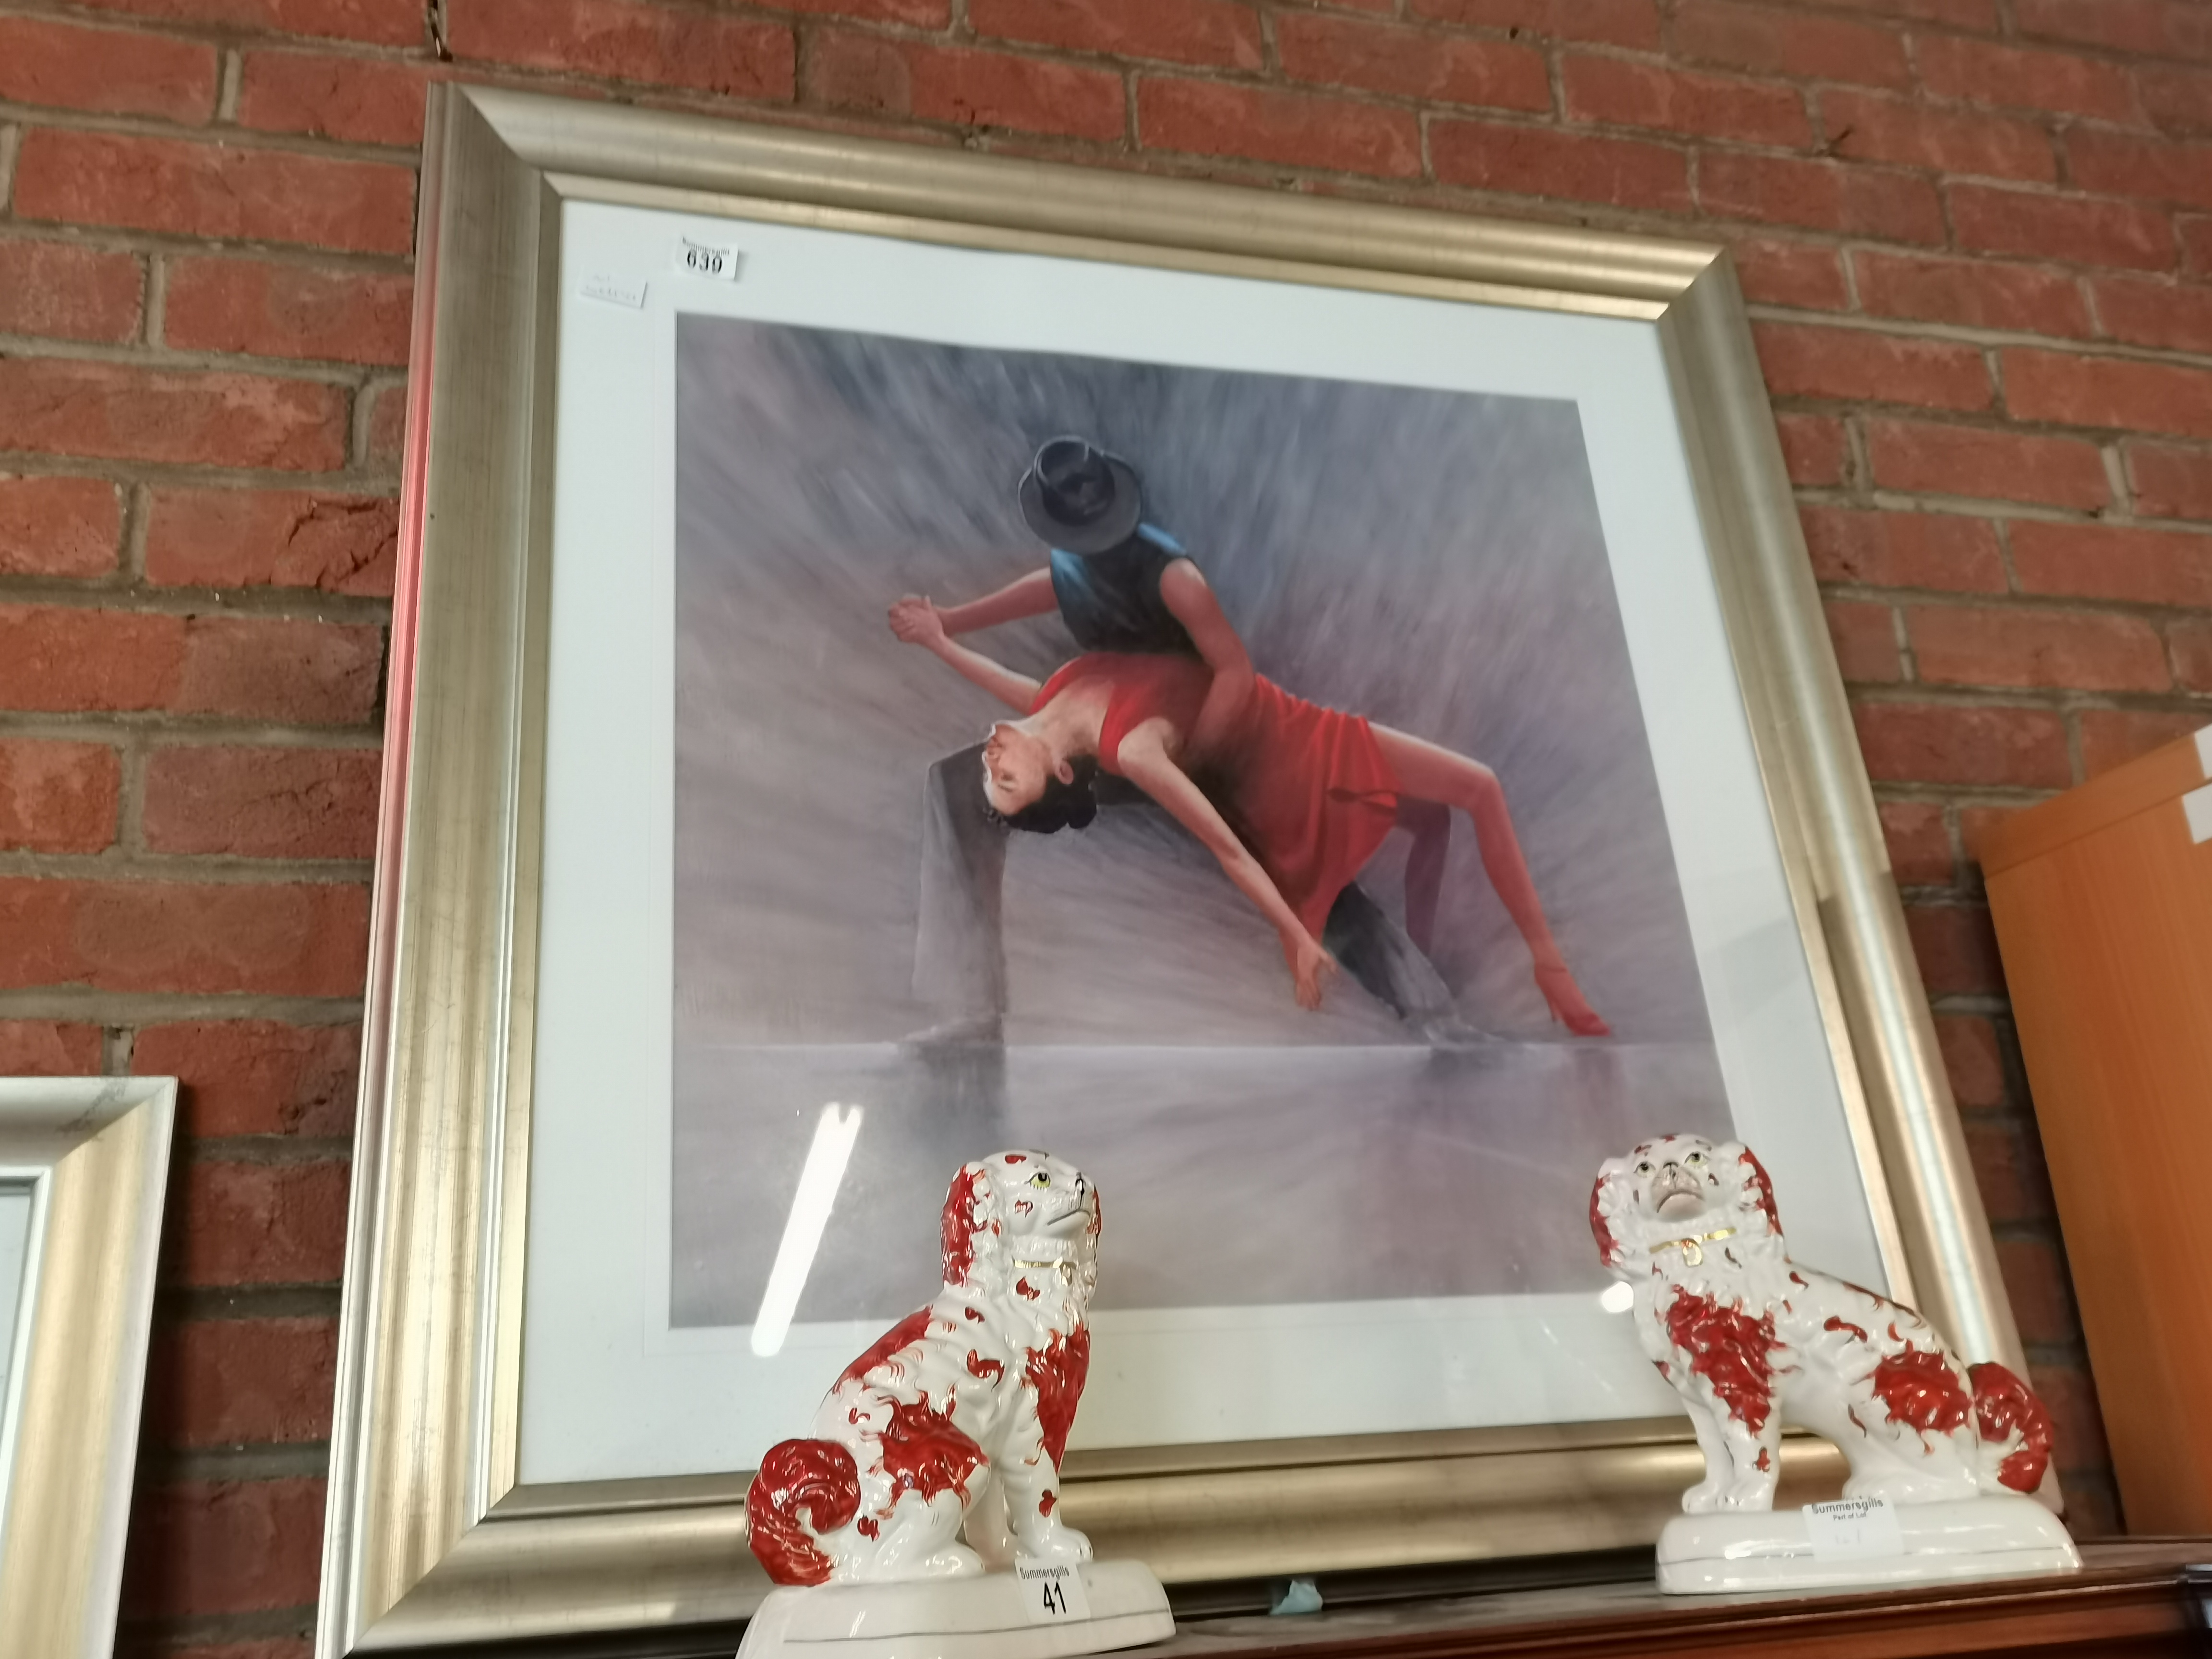 Large print of Spanish dancers in silvered frame